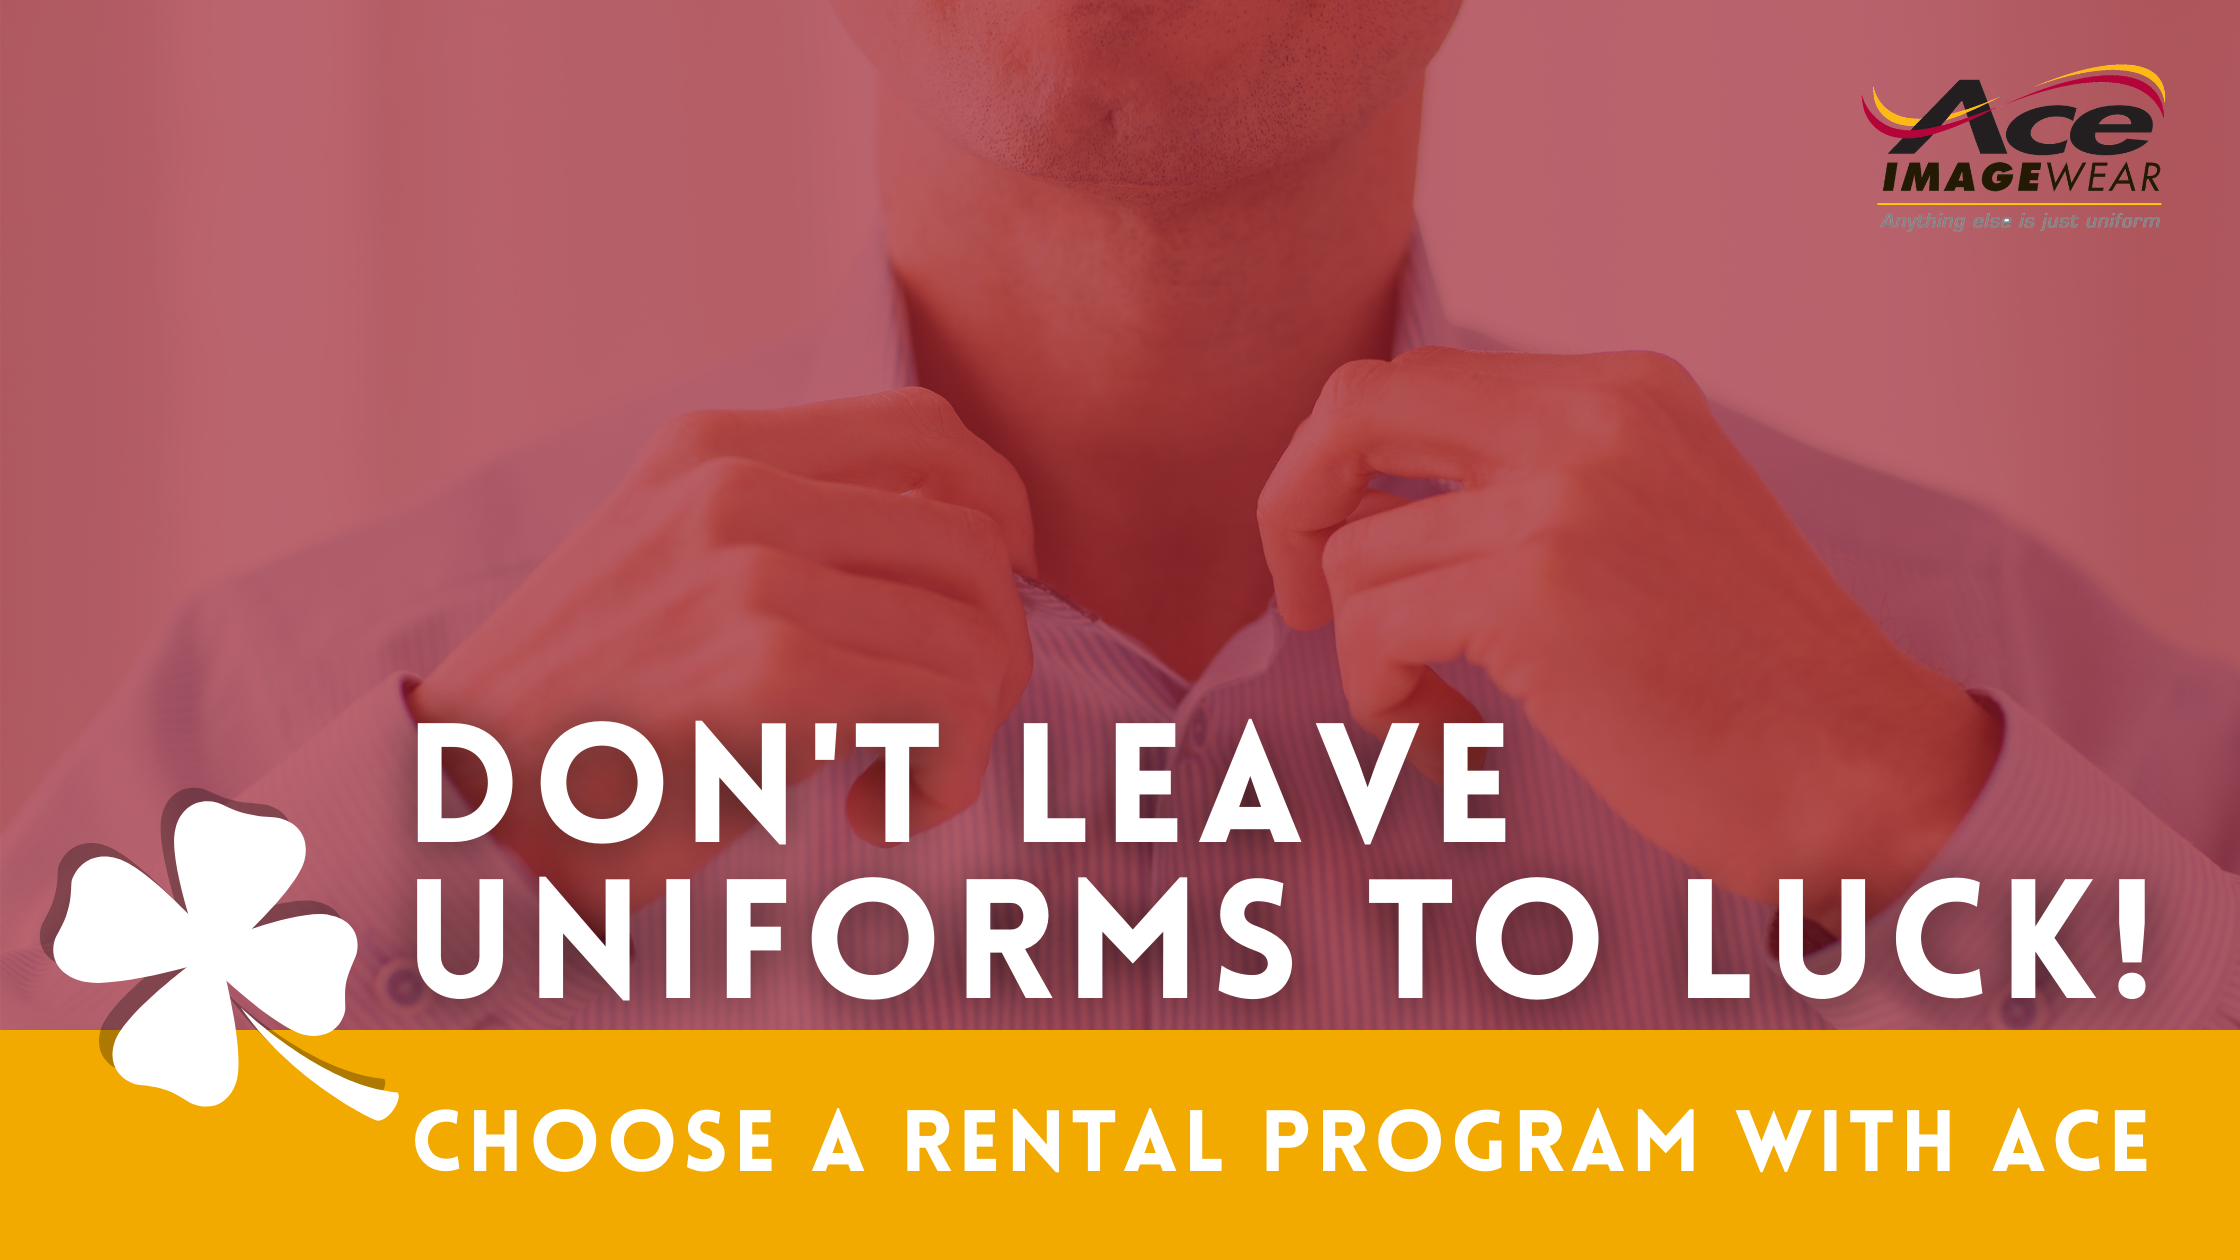 Don’t Leave Uniforms to Luck!